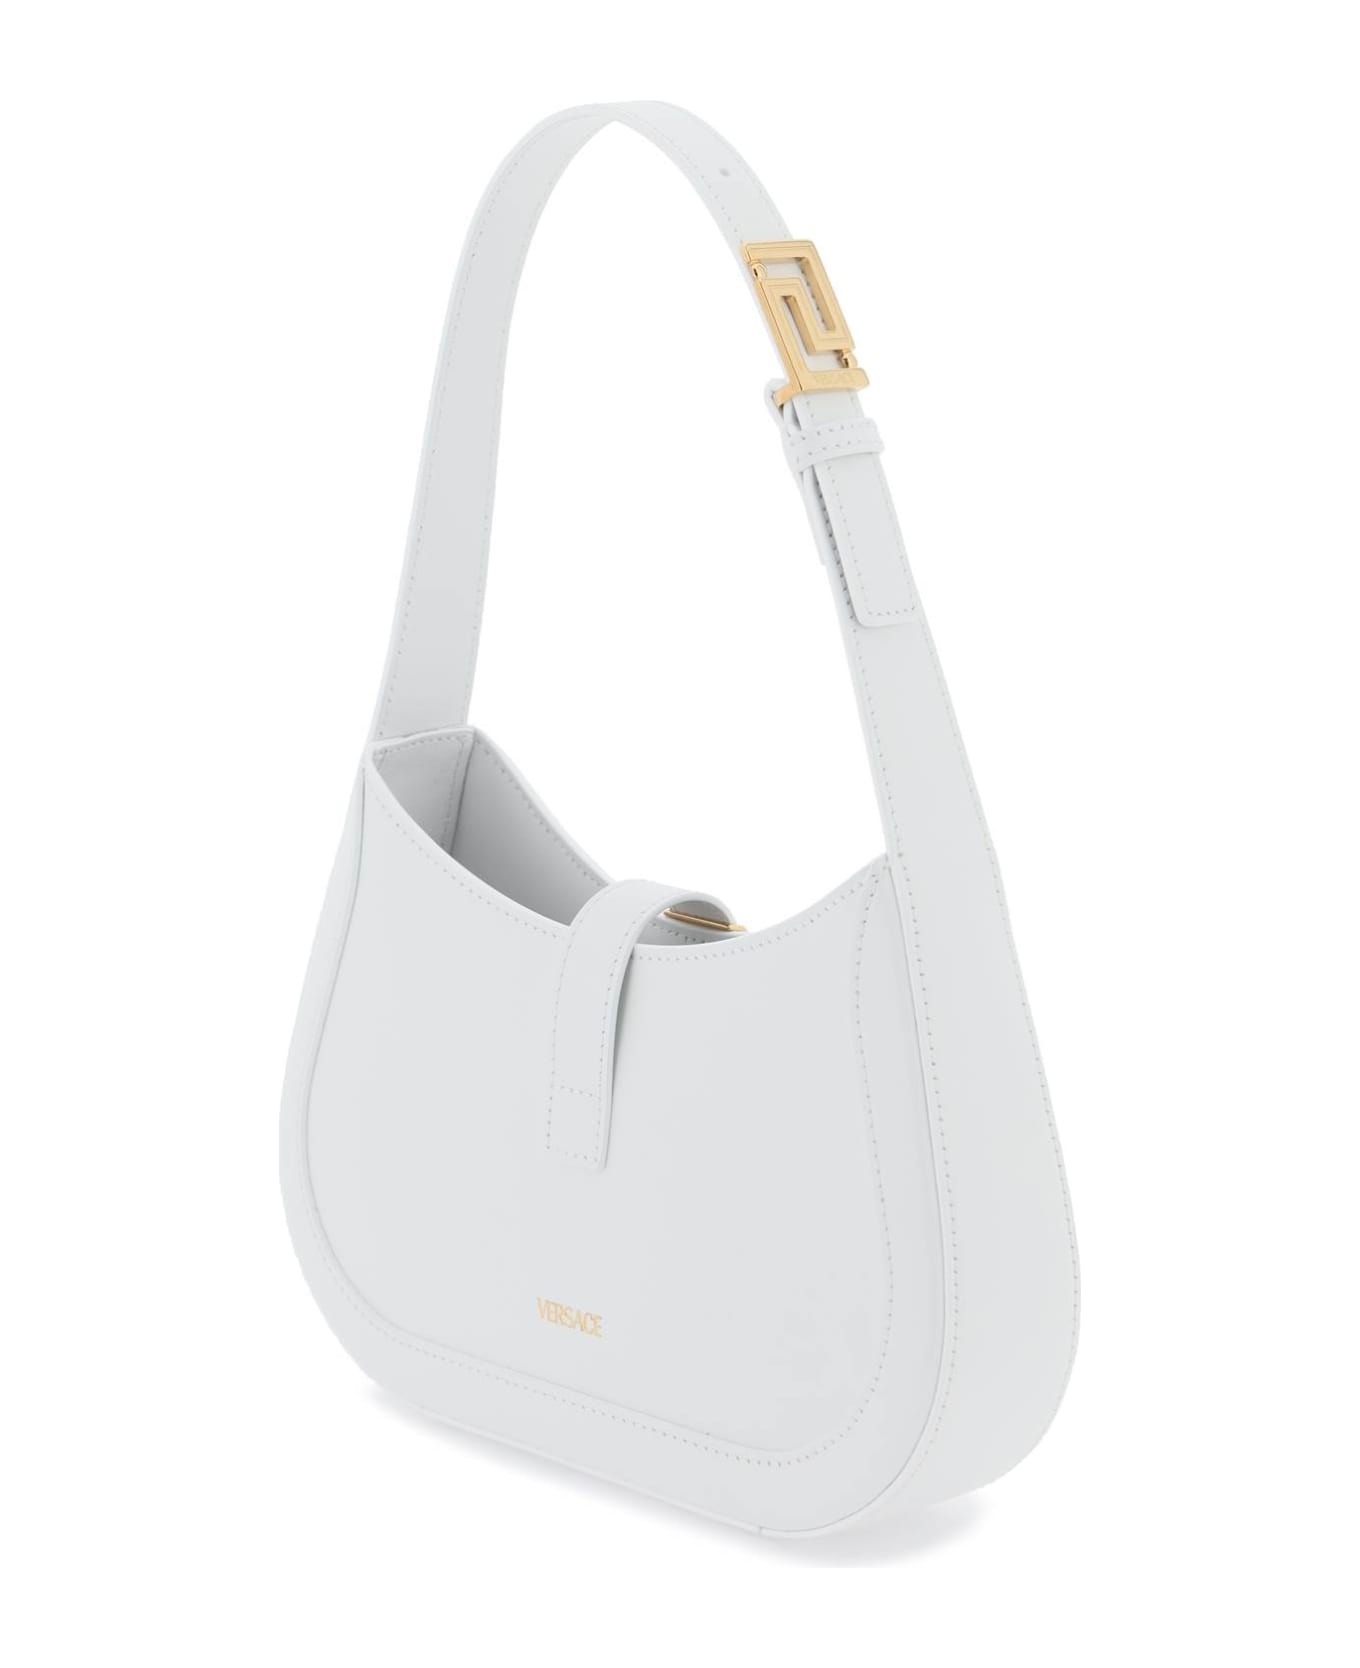 Versace White Leather Bag - White トートバッグ